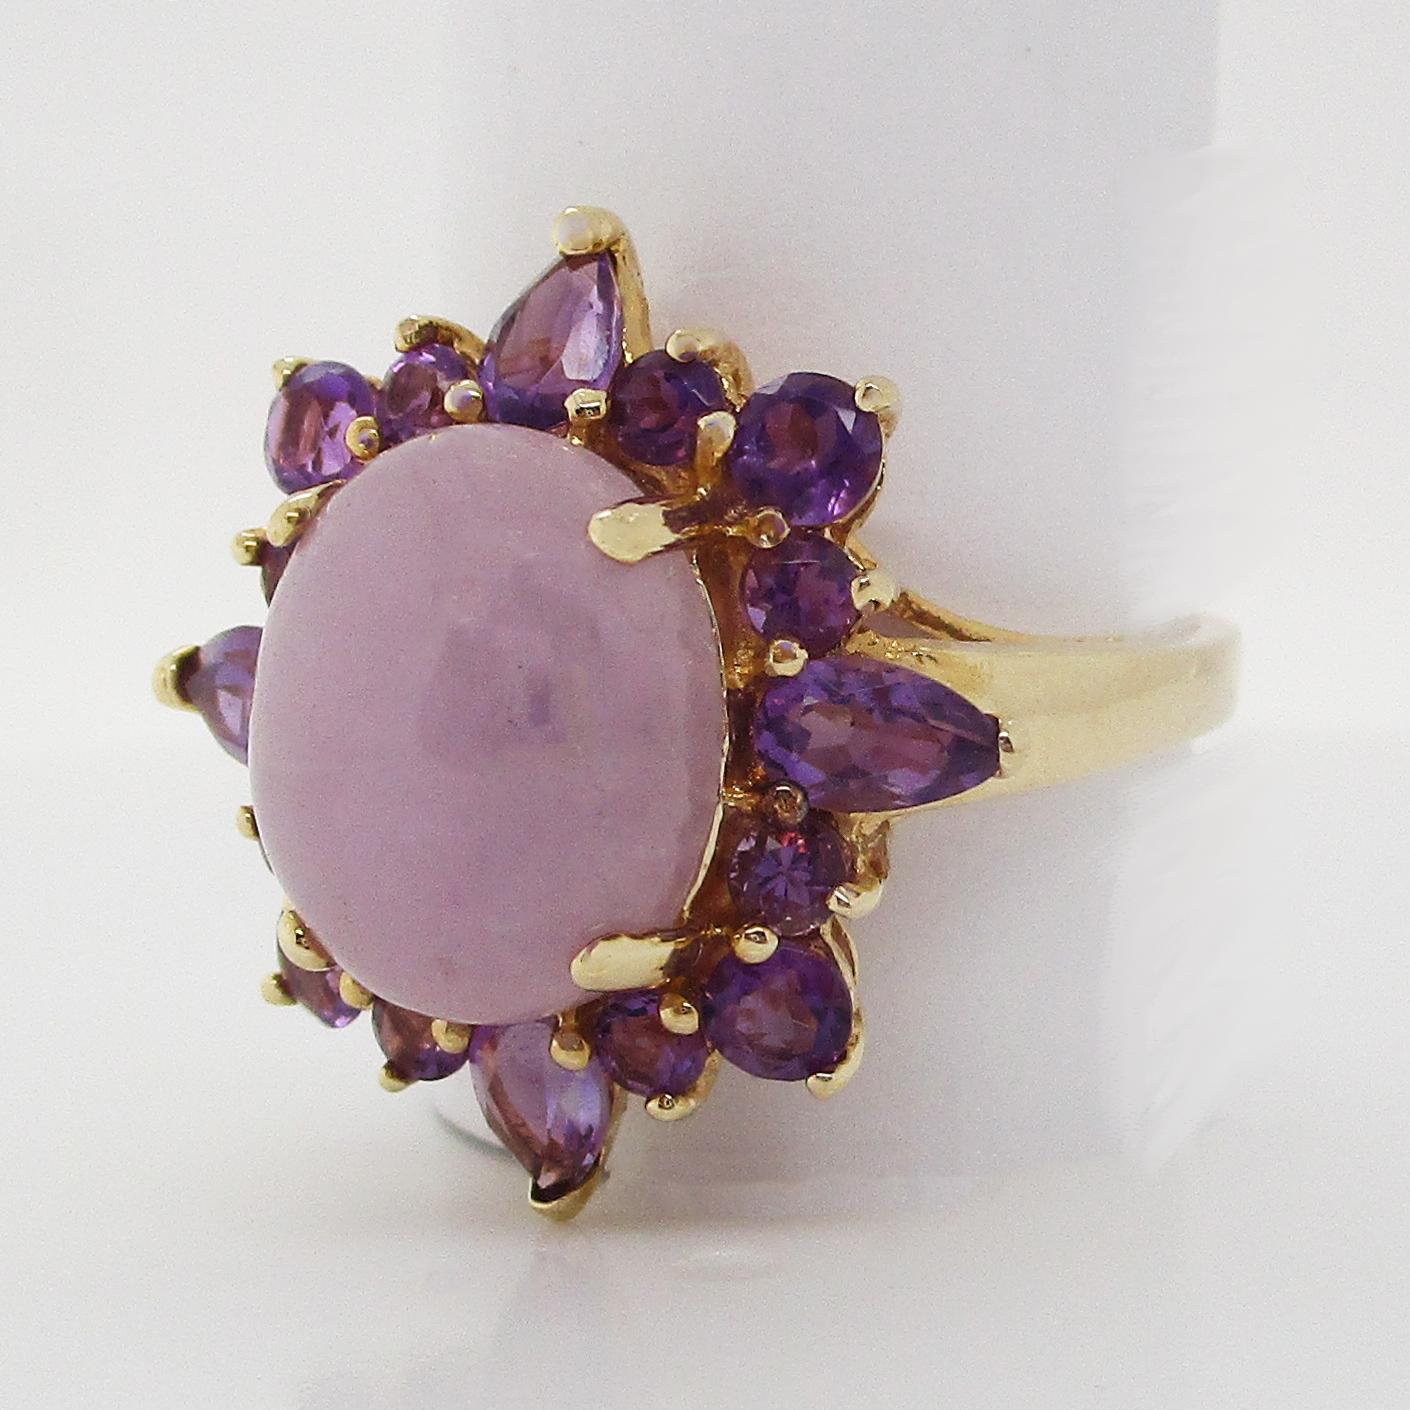 This is a stunning cocktail statement ring in 14k yellow gold featuring a remarkable lavender jade cabochon center framed with a row of amethyst. The ring has an arching undergallery that perfectly supports the lavender jade center and the amethyst!